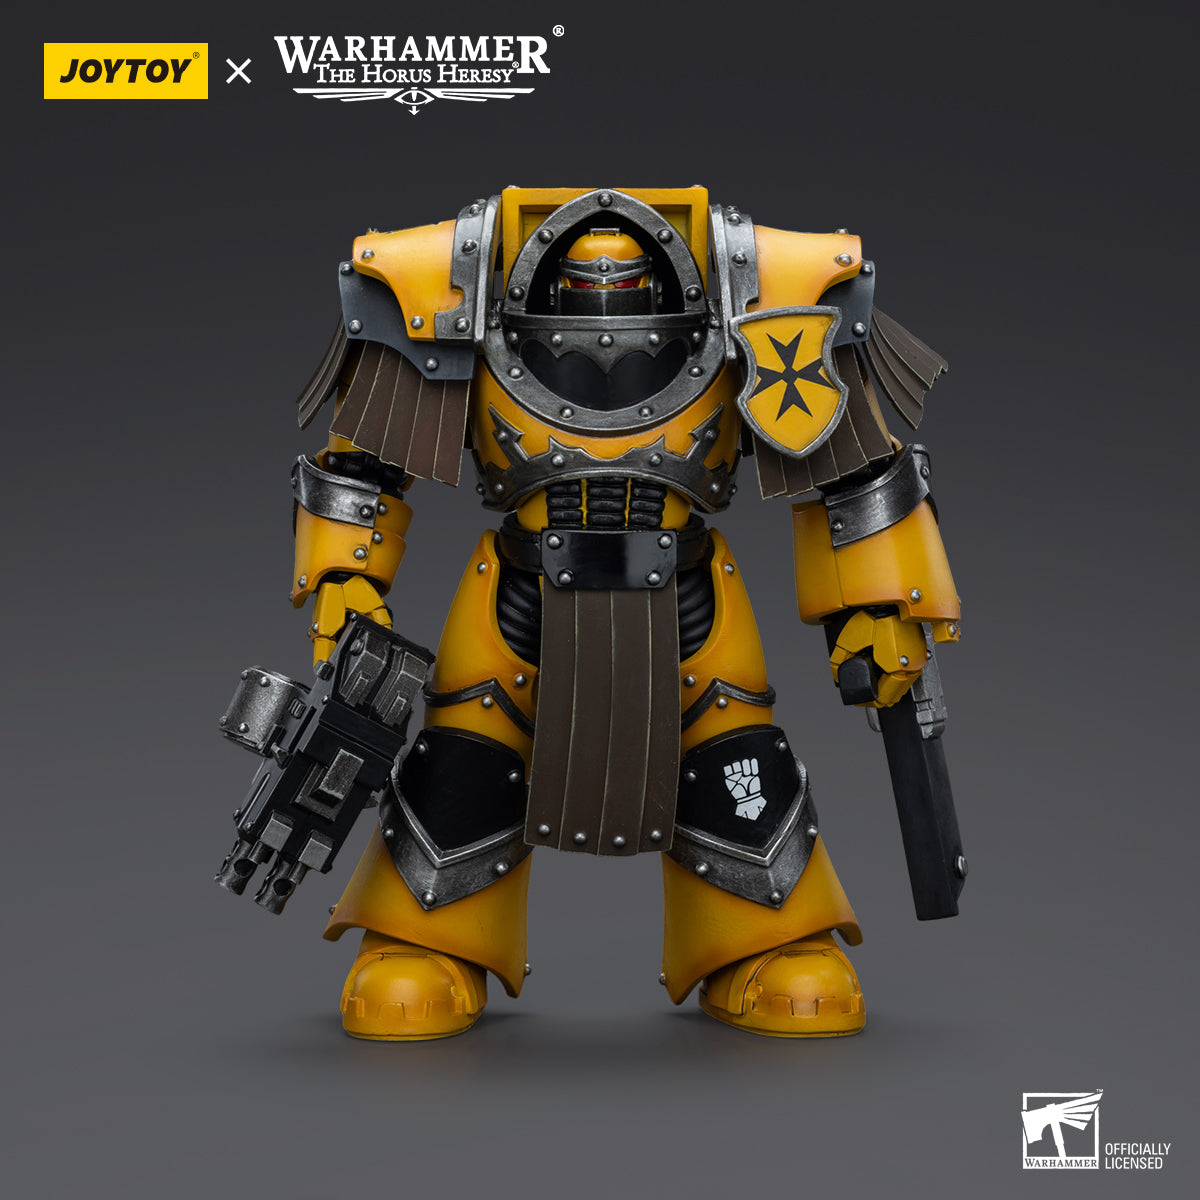 Warhammer Collectibles: 1/18 Scale Imperial Fists Legion Cataphractii Terminator Squad w/ Chainfist (Preorder)